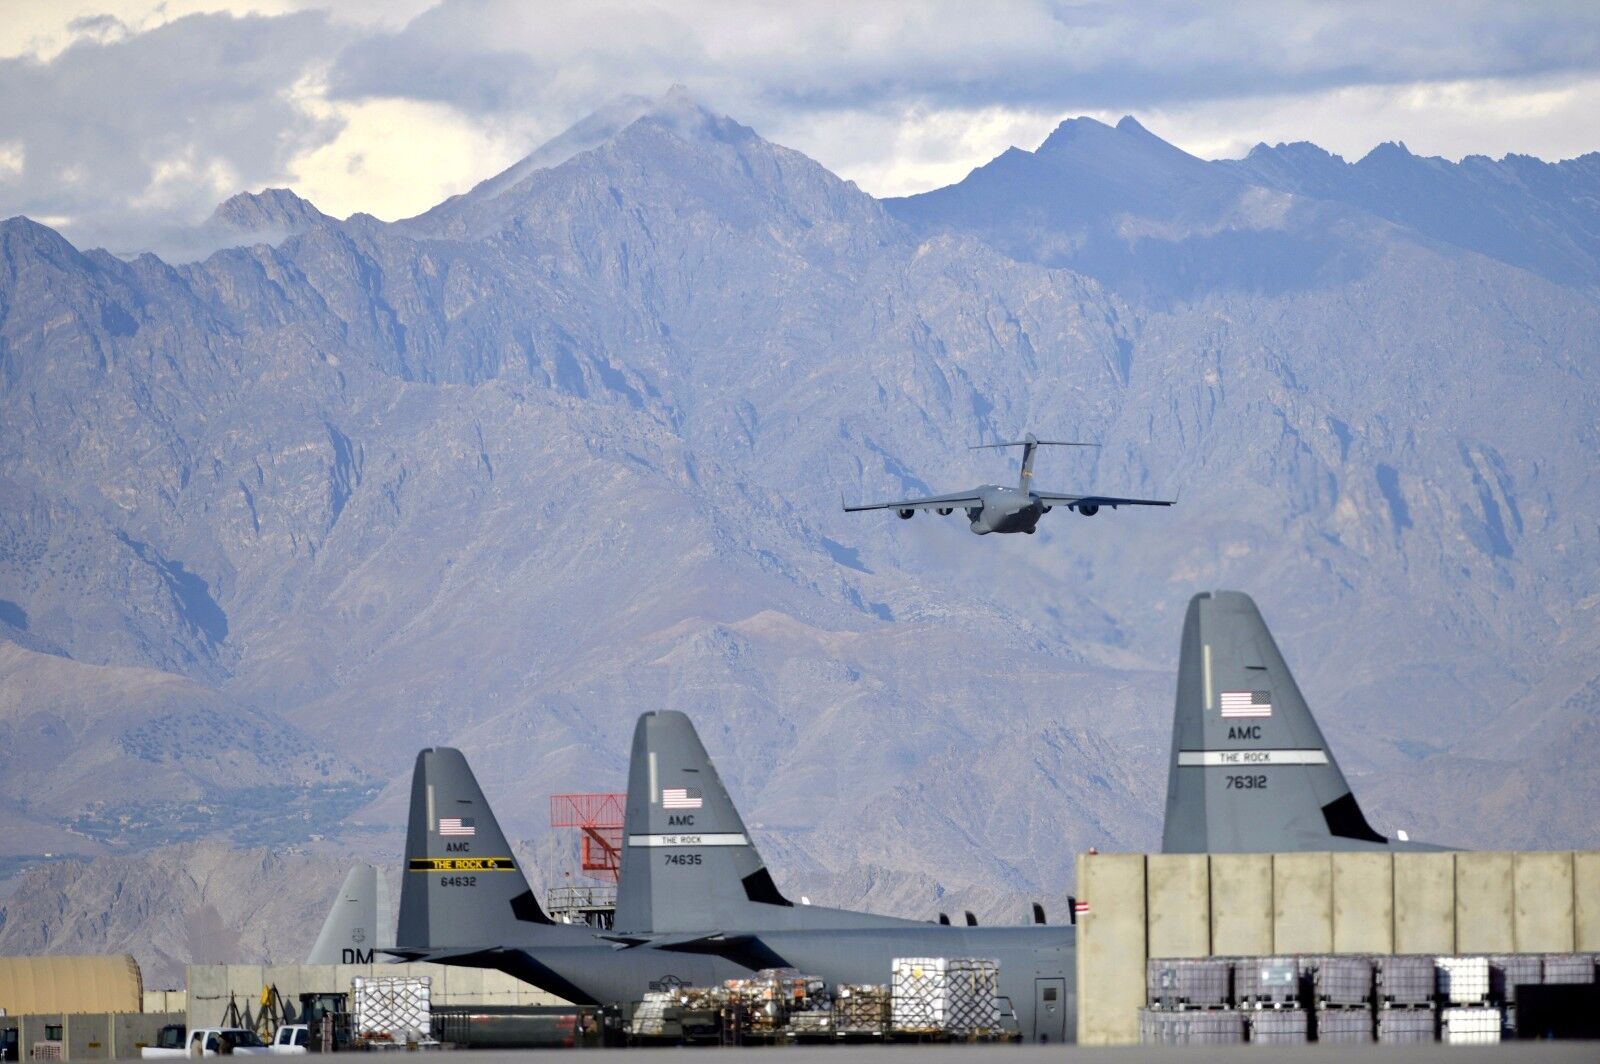 C-17 Globemaster III takes off into the mountains, Bagram Air Field, Afghanistan